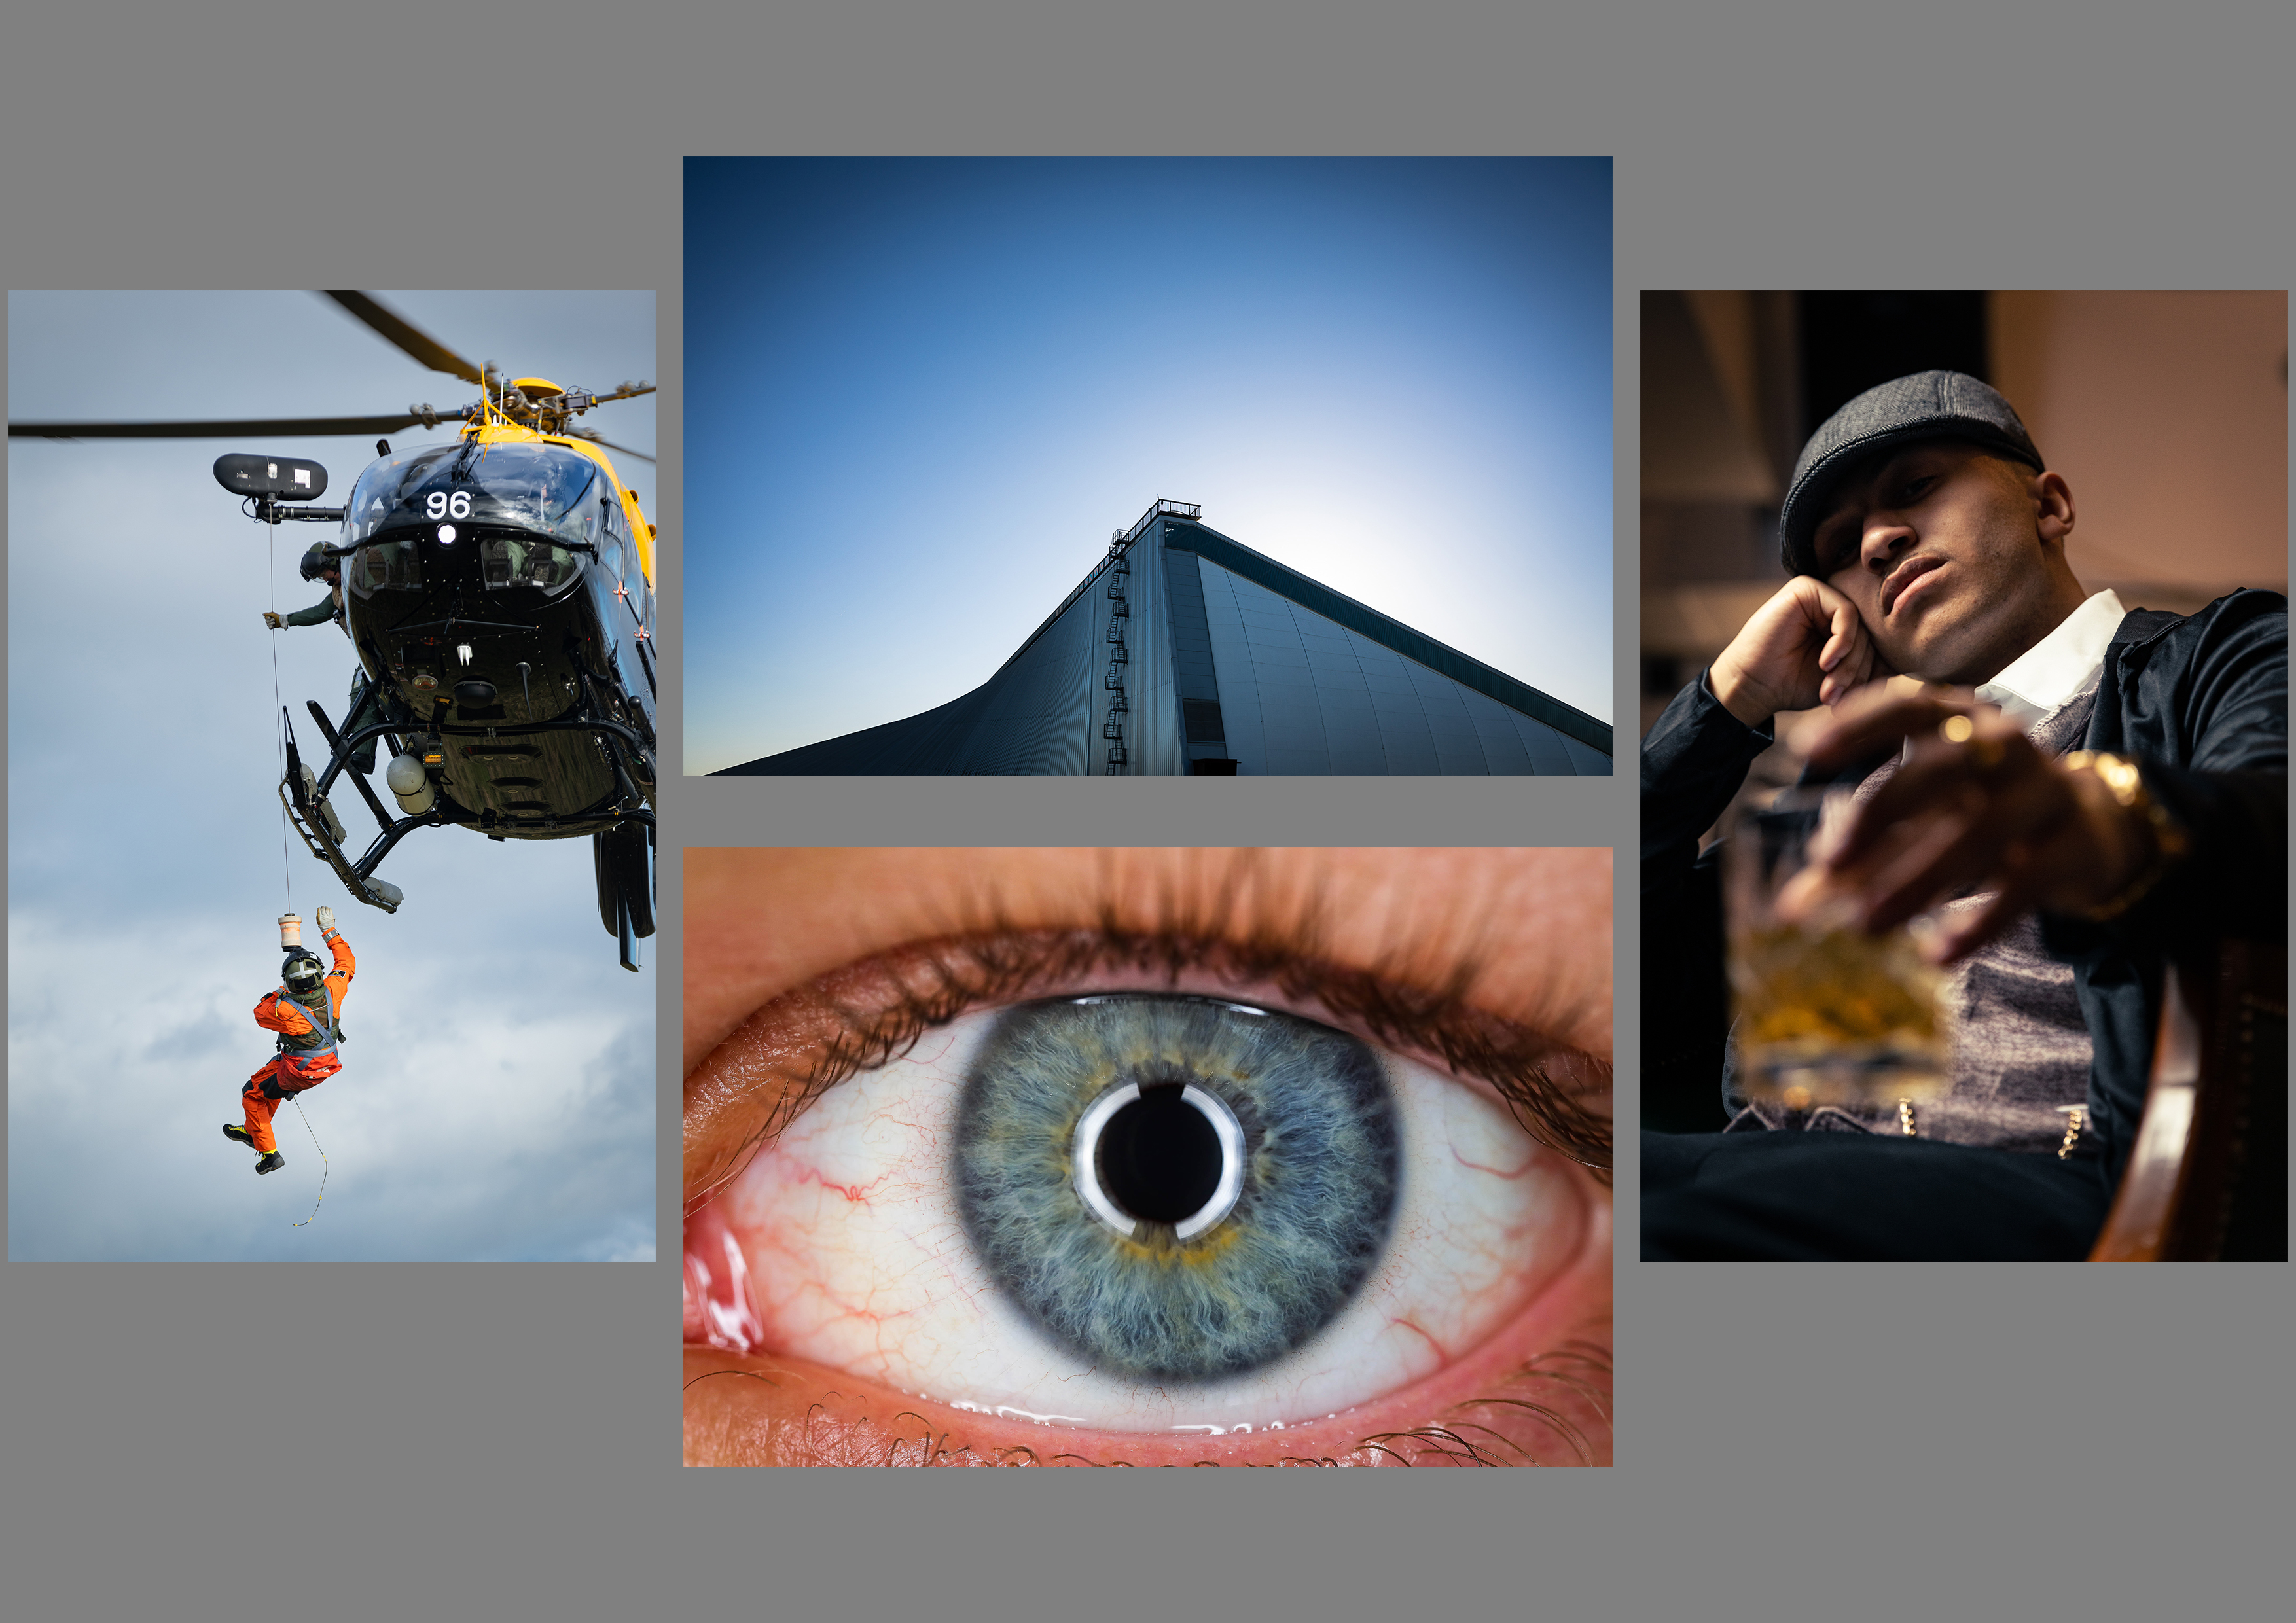 Image shows picture collage, featuring an aviator rappelling out of a helicopter; a building; a man holding a glass of whisky to the camera; and a close up of an open eye.